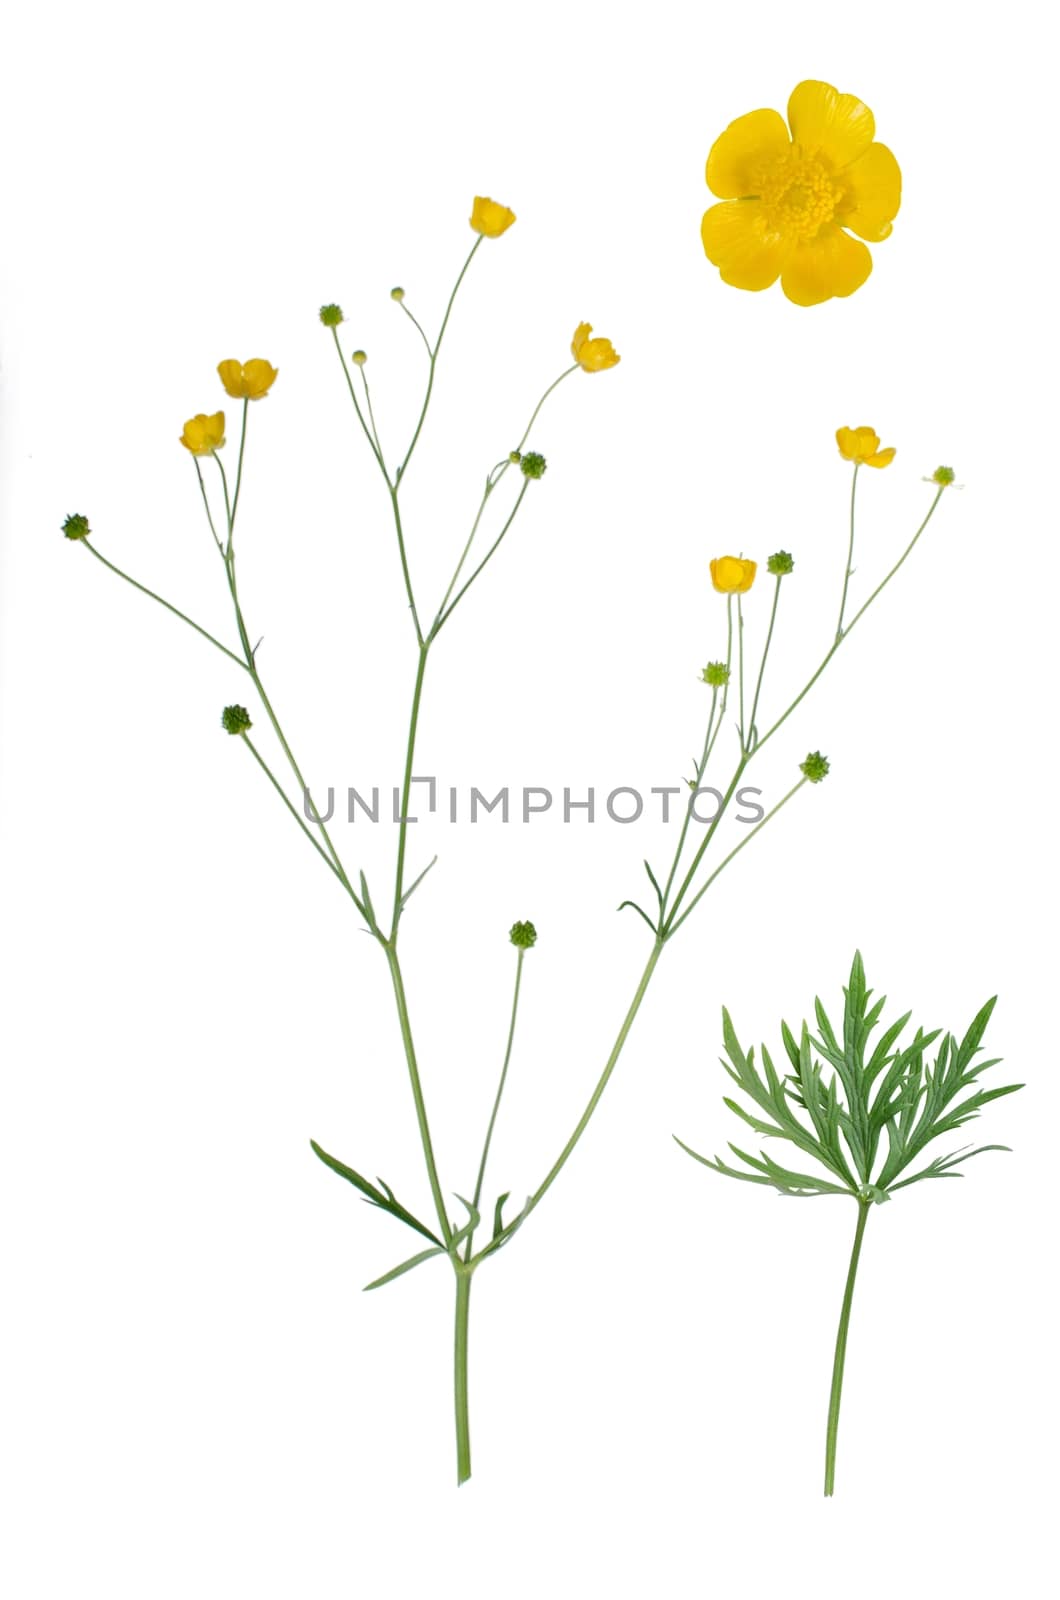 Ranunculus flower and details of bloom and leaf isolated on white backgorund.